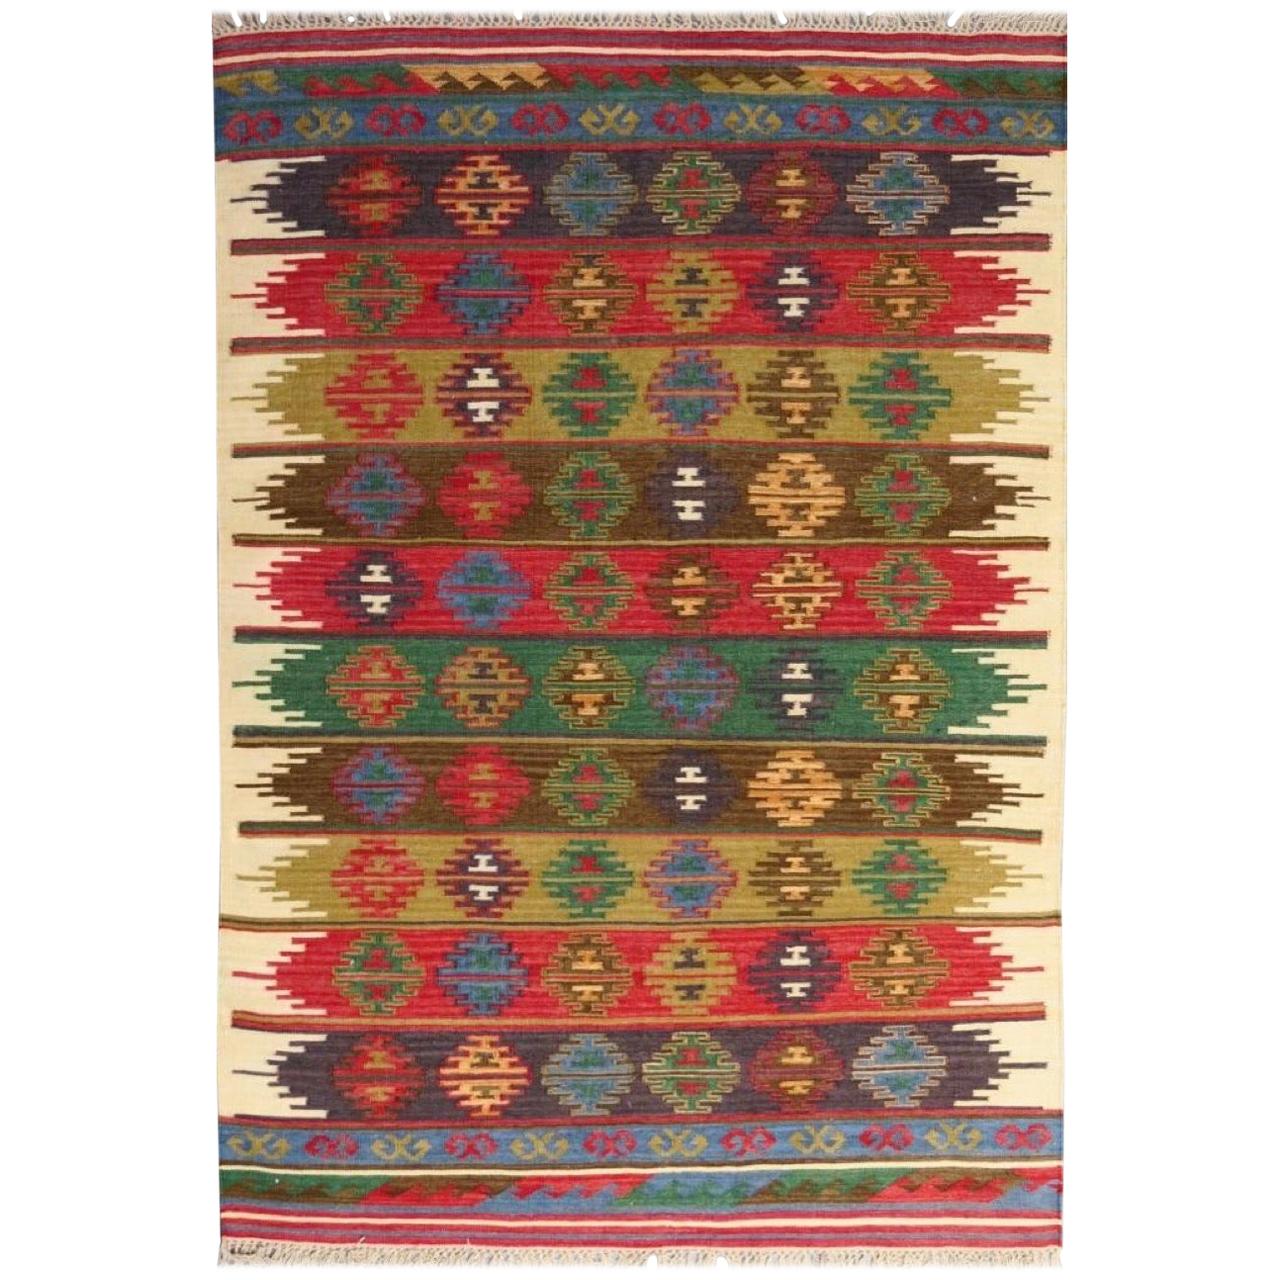 Beautiful New Anatolian Design Handwoven Kilim Rug  size 6ft 6in x 9ft 10in For Sale